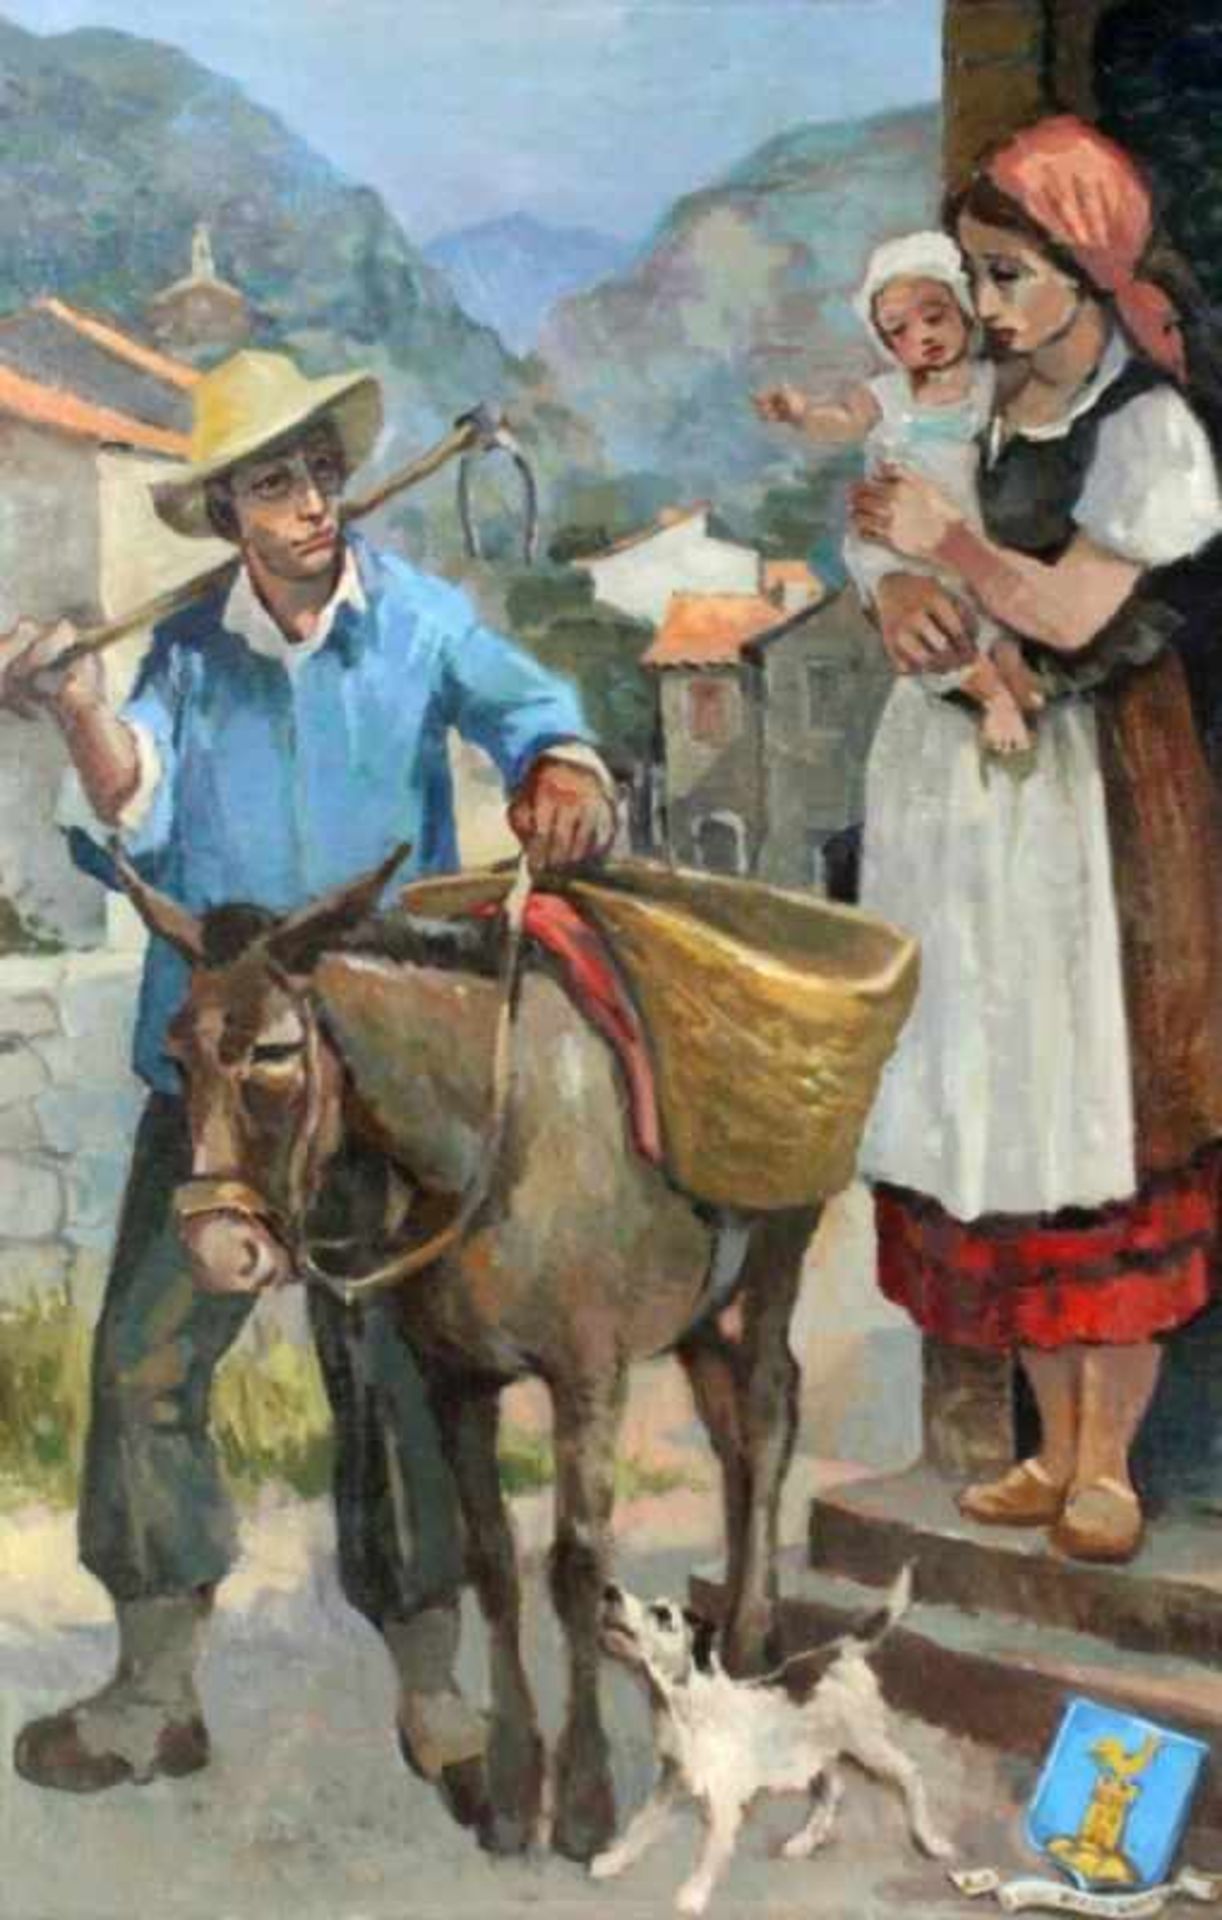 UNKNOWN ARTIST Nice, France, 20th century Farm family with donkey in the hinterland of